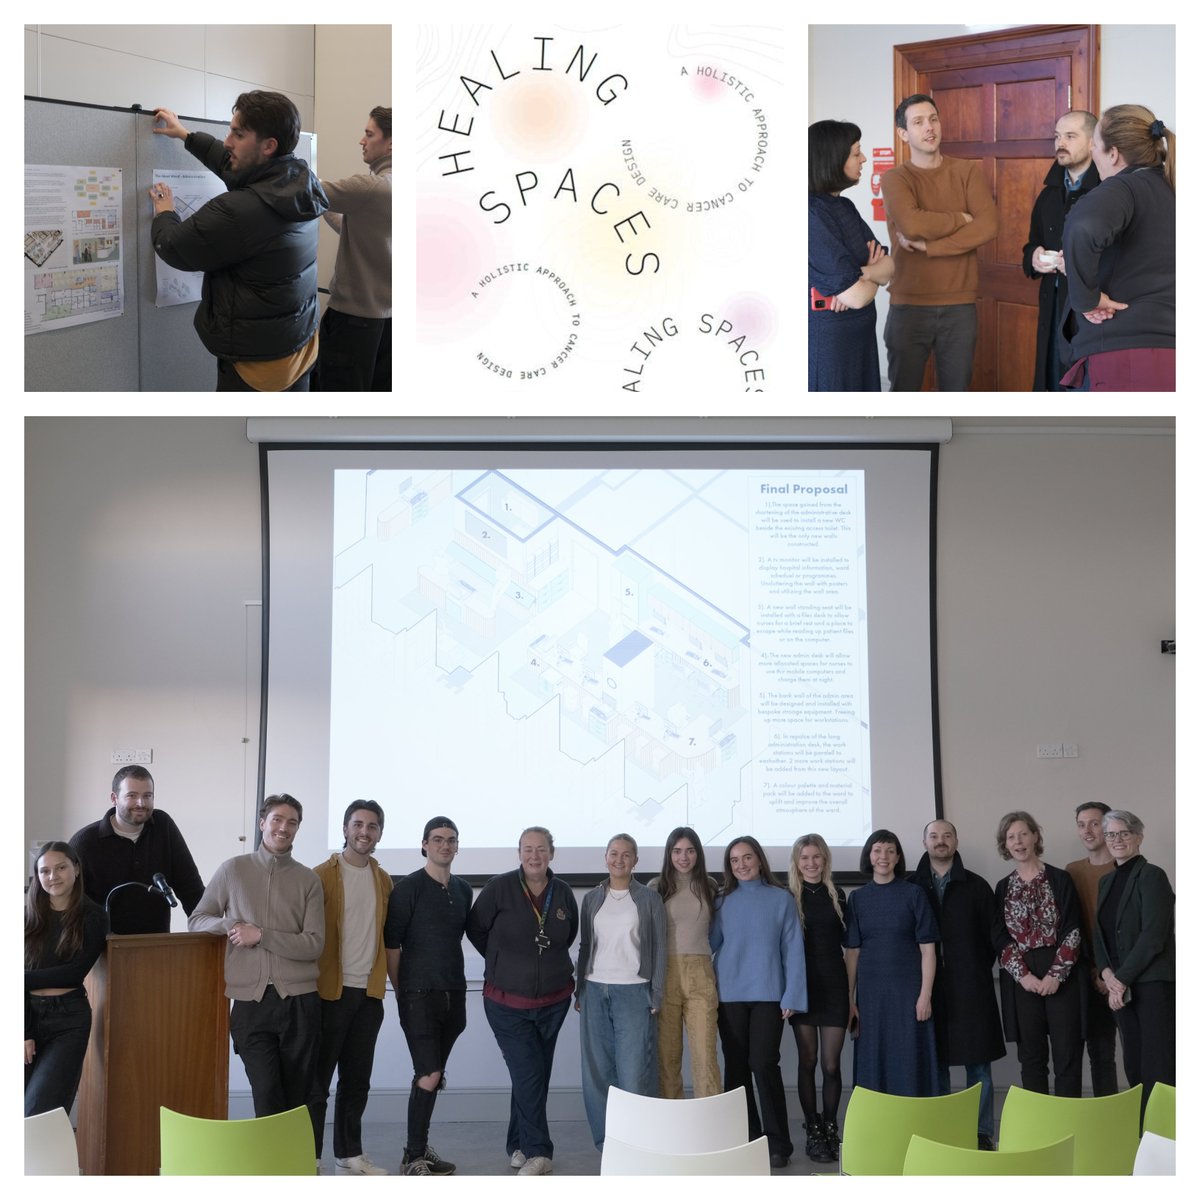 A great pleasure to host the first “Healing Spaces” showcase, representing a new collaboration for us with @SABE_TUDublin & @ProgrammeSpark. Since September, final year architecture students have worked with the Mater oncology team to improve and enhance their day ward facility.